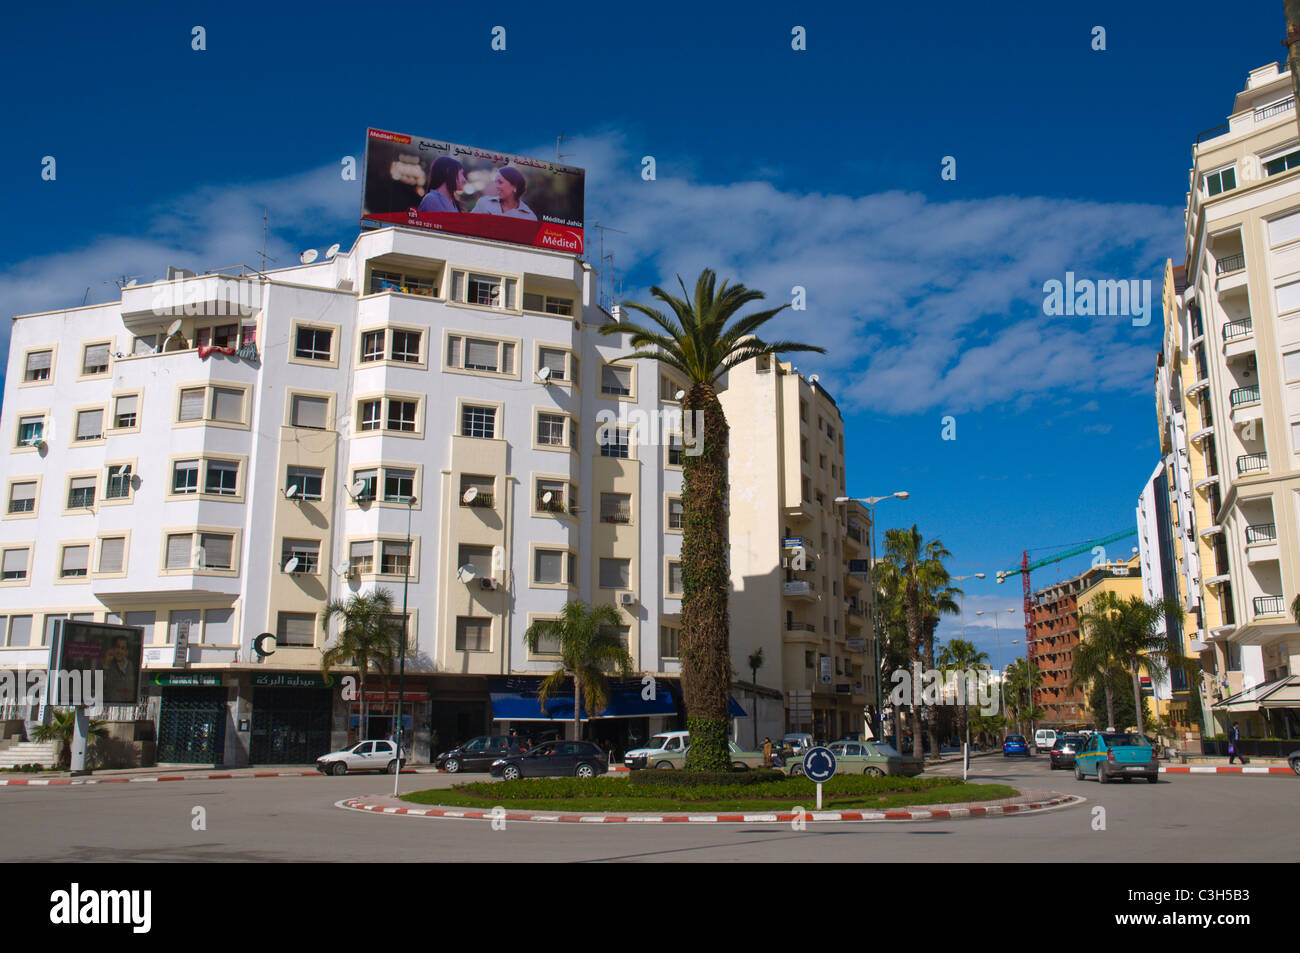 Place al Kouwait square new town Tangier Morocco northern Africa Stock Photo